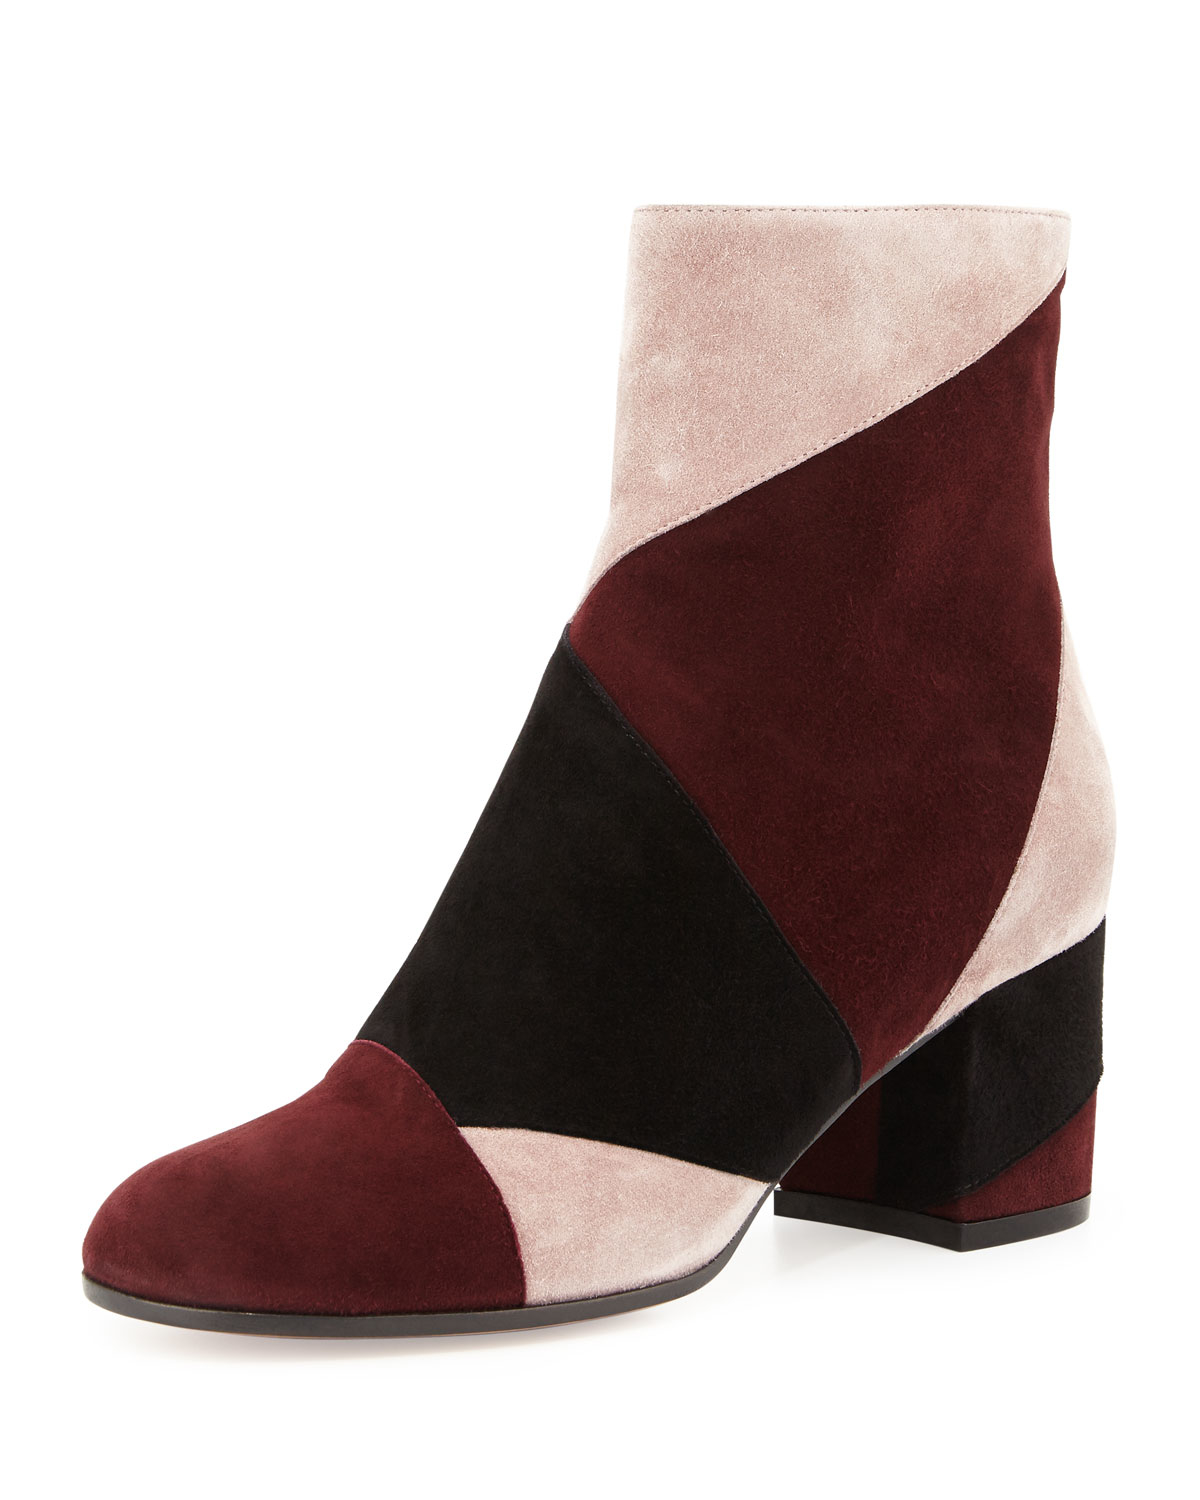 Lyst - Gianvito Rossi Angled Patchwork Suede Ankle Boot in Black